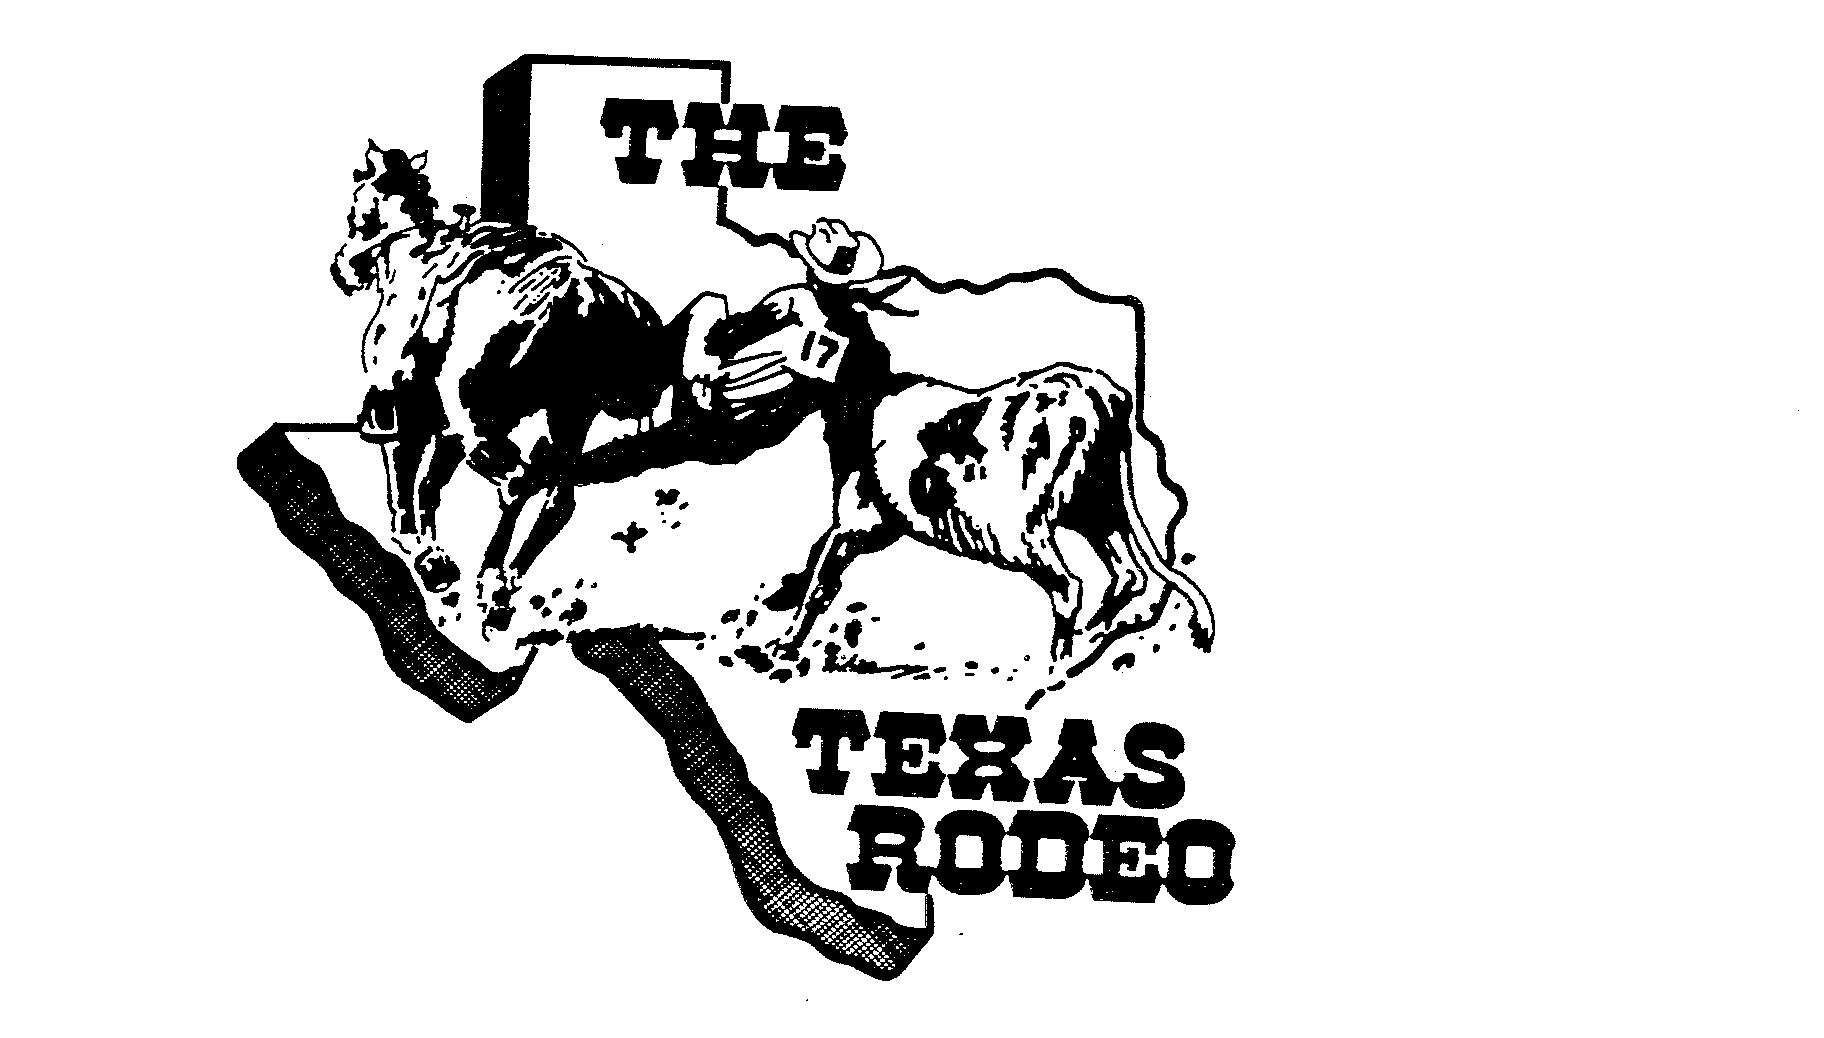  THE TEXAS RODEO